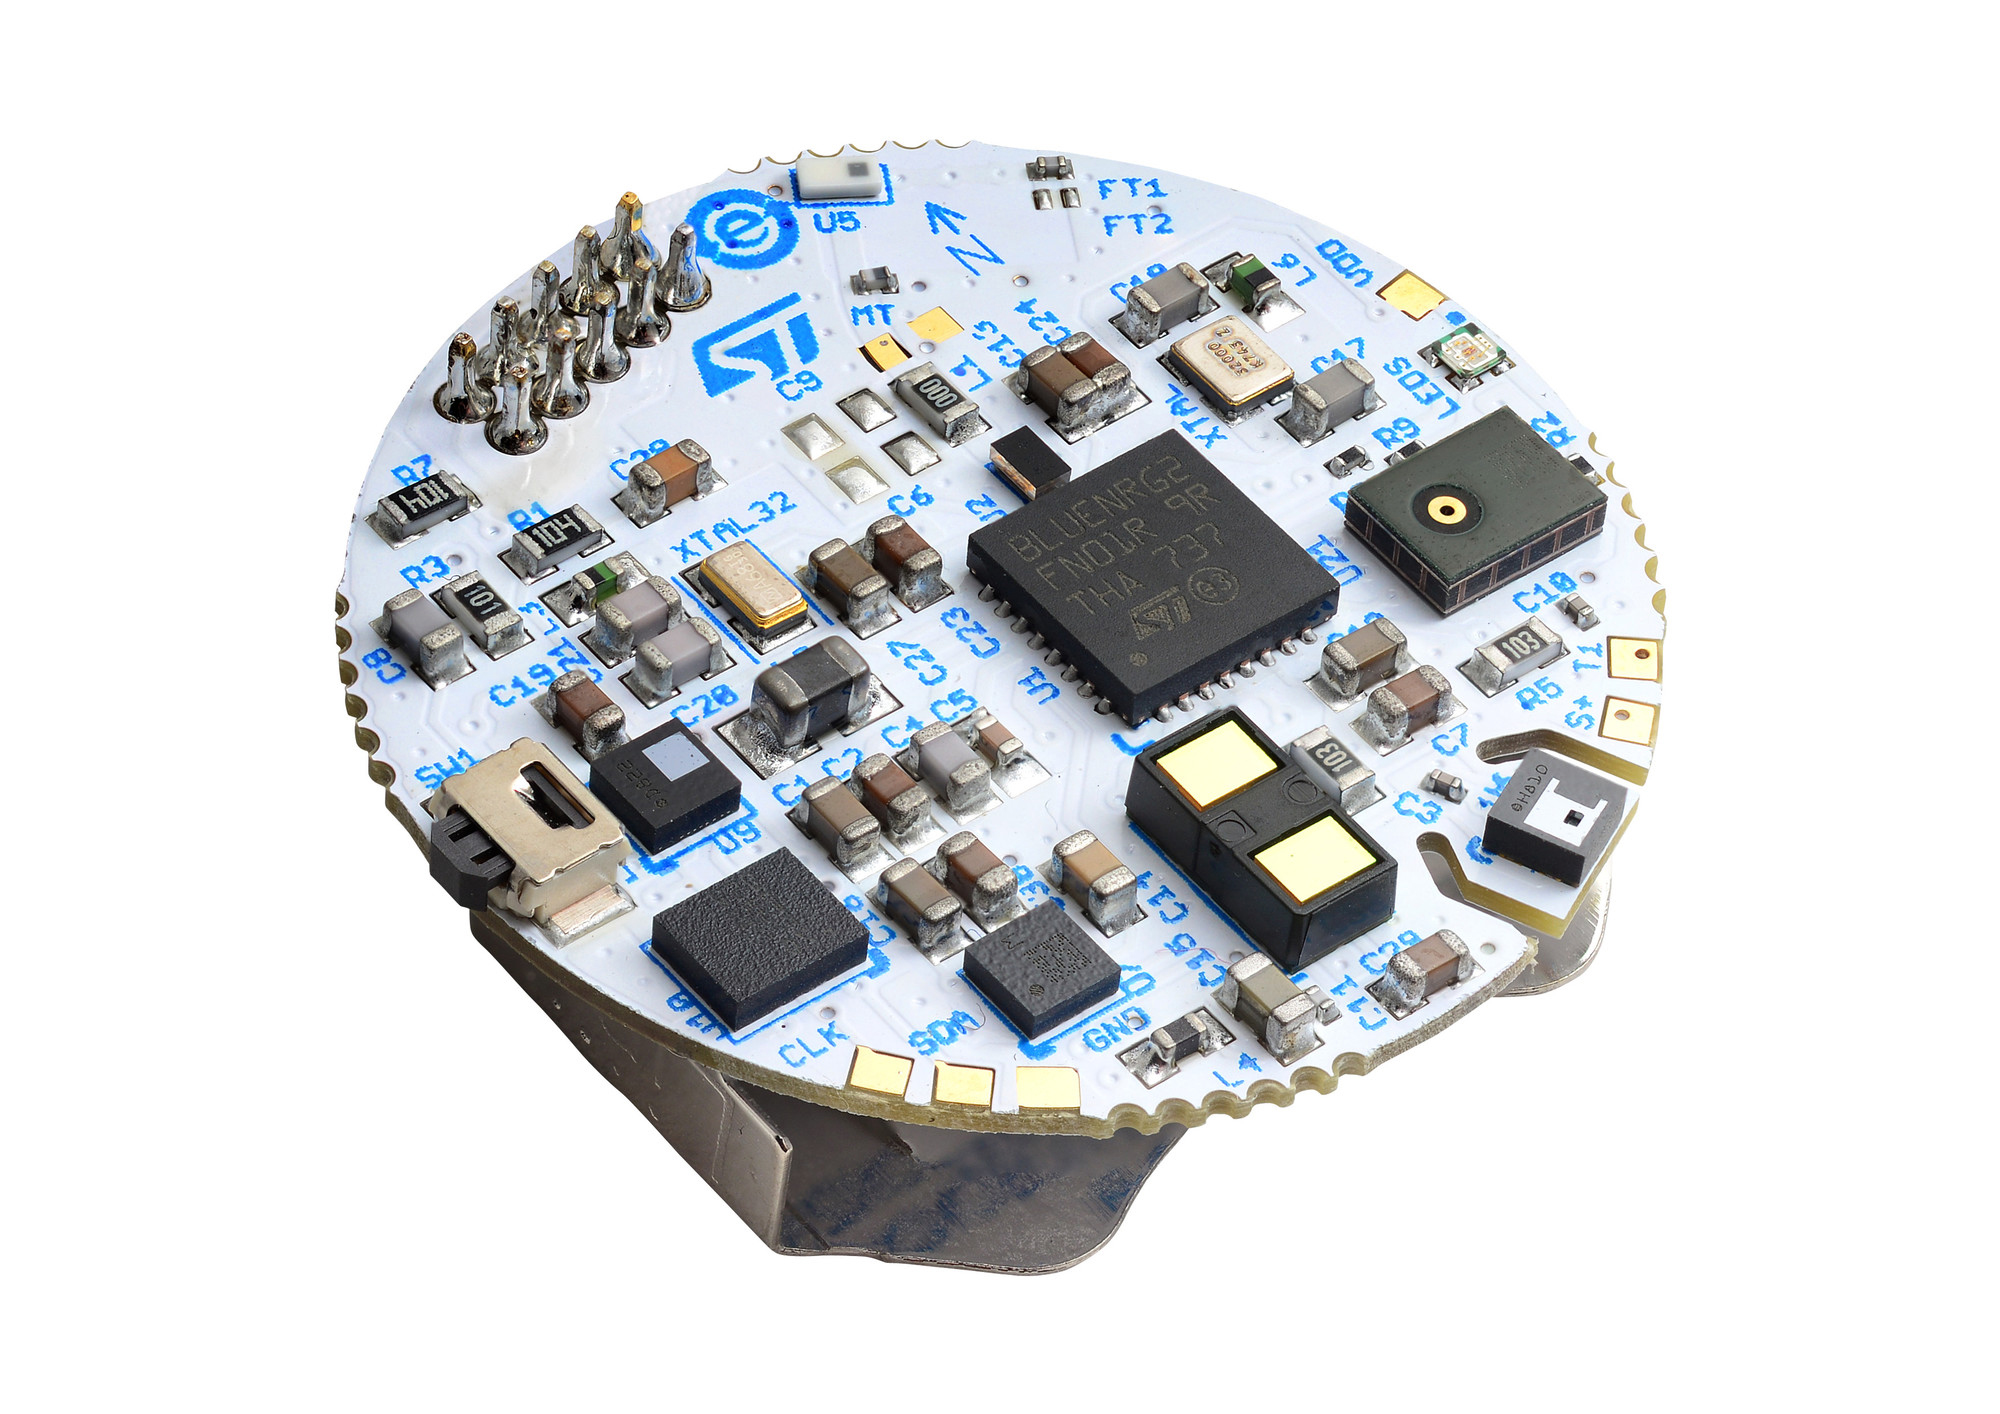 STMicroelectronics’ Reference Design Enables Compact and Cost-Effective Wearables with Social-Distancing, Contact-Tracing, and Remote Capabilities